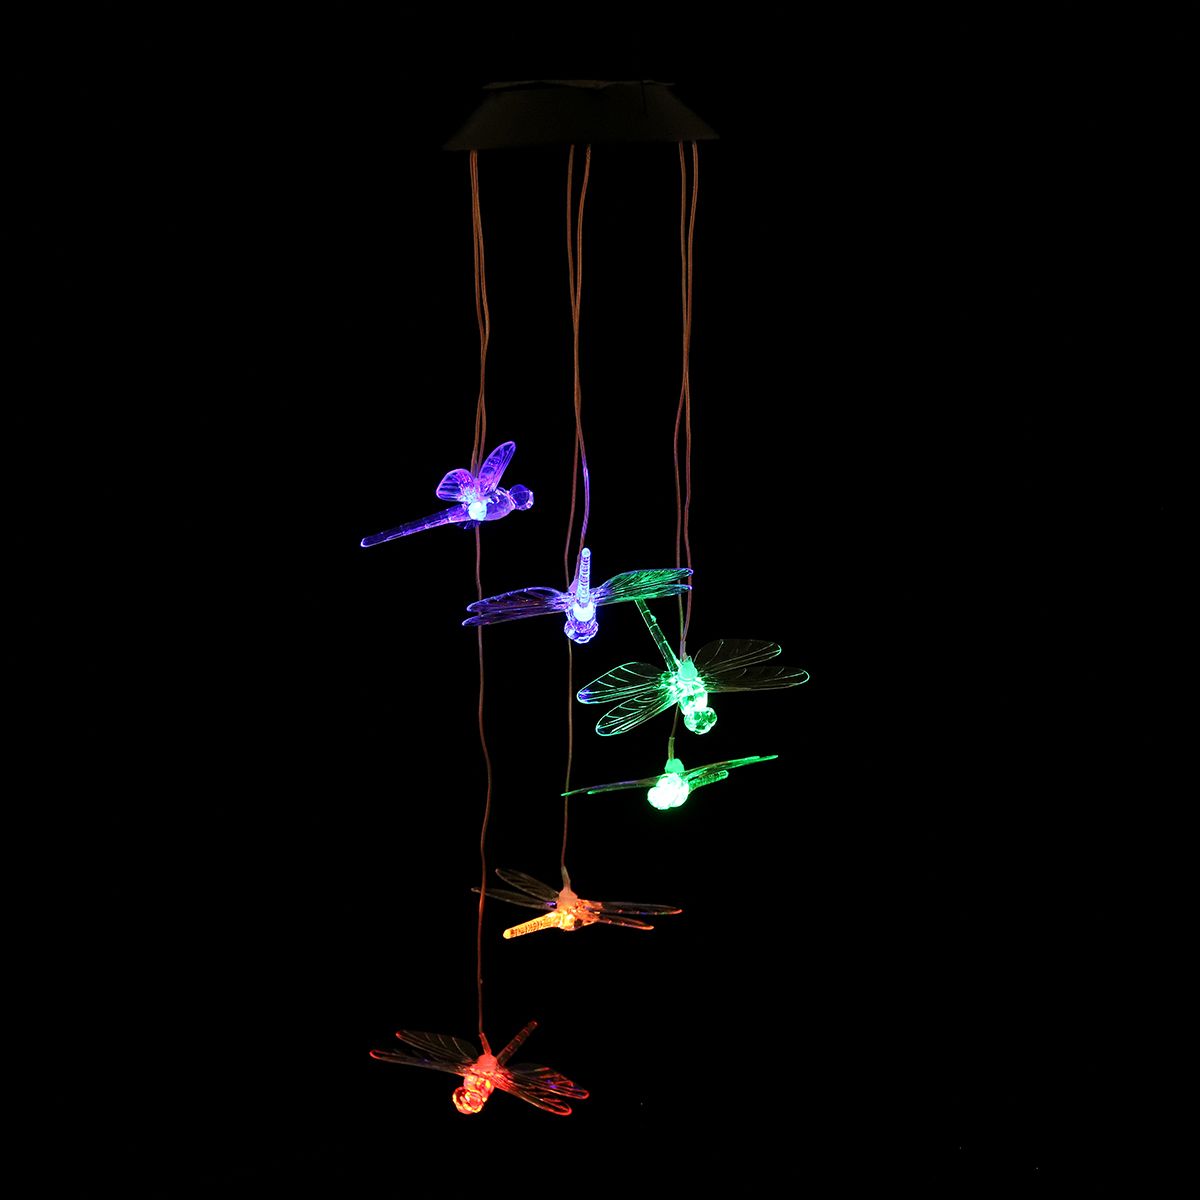 Color-Changing-LED-Solar-Powered-Wind-Chime-Light-Hanging-Garden-Yard-Decor-1760795